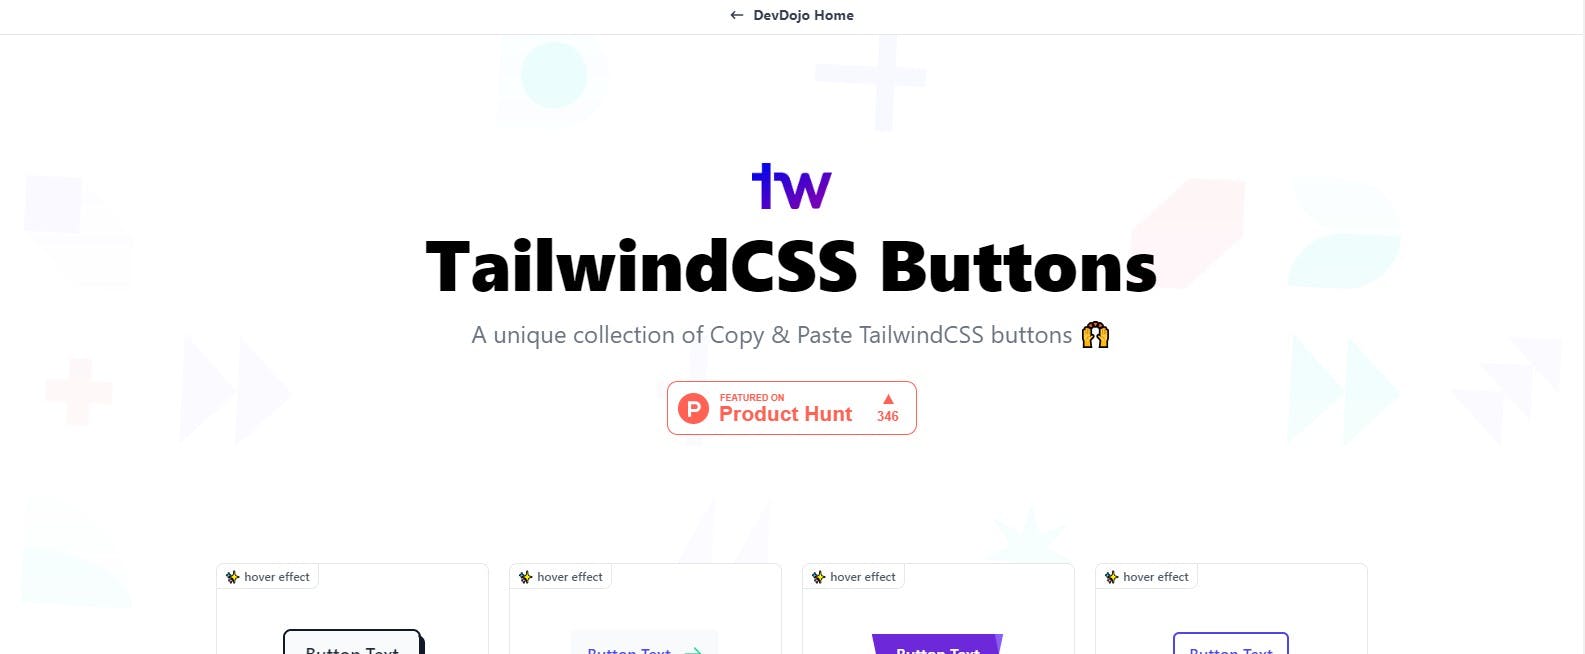 Tailwind CSS Buttons — Well-designed Tailwind button collection